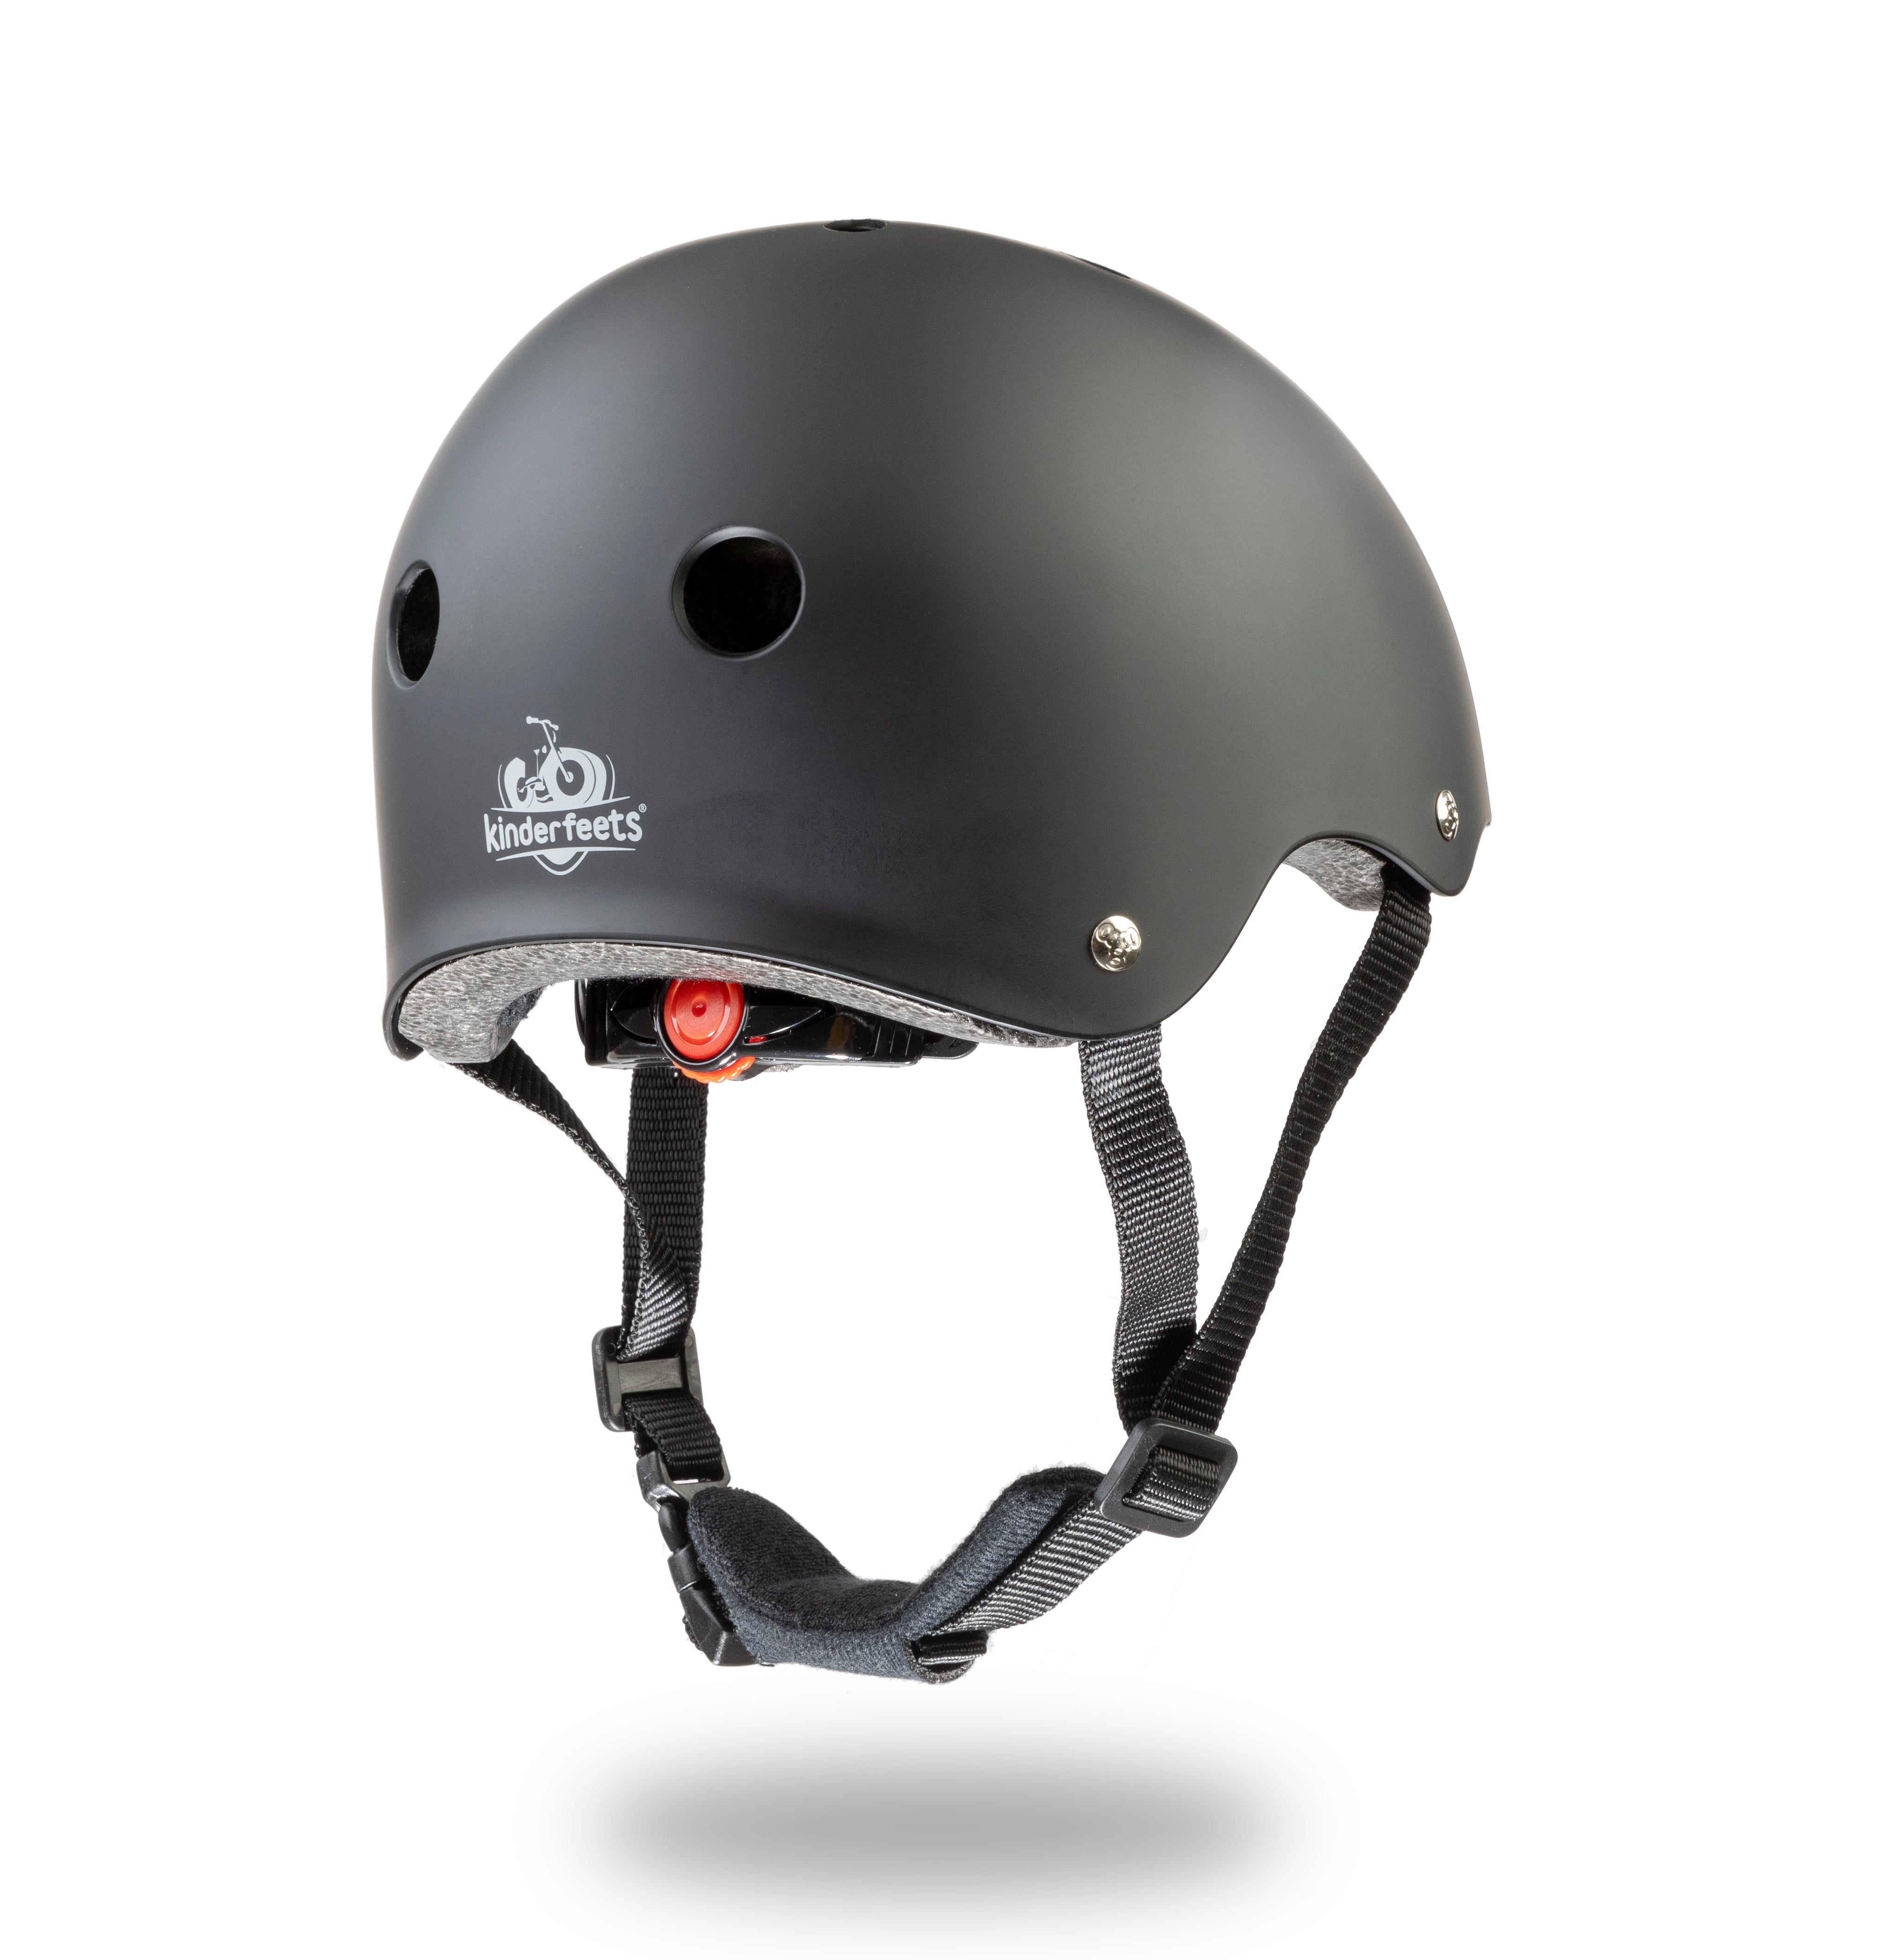 Kinderfeets Toddler Bike Safety Helmet in Matte Black. Adjustable Fit Dial System and padded chin strap provide additional comfort while an ABS outer shell and EPS liner ensure child safety.